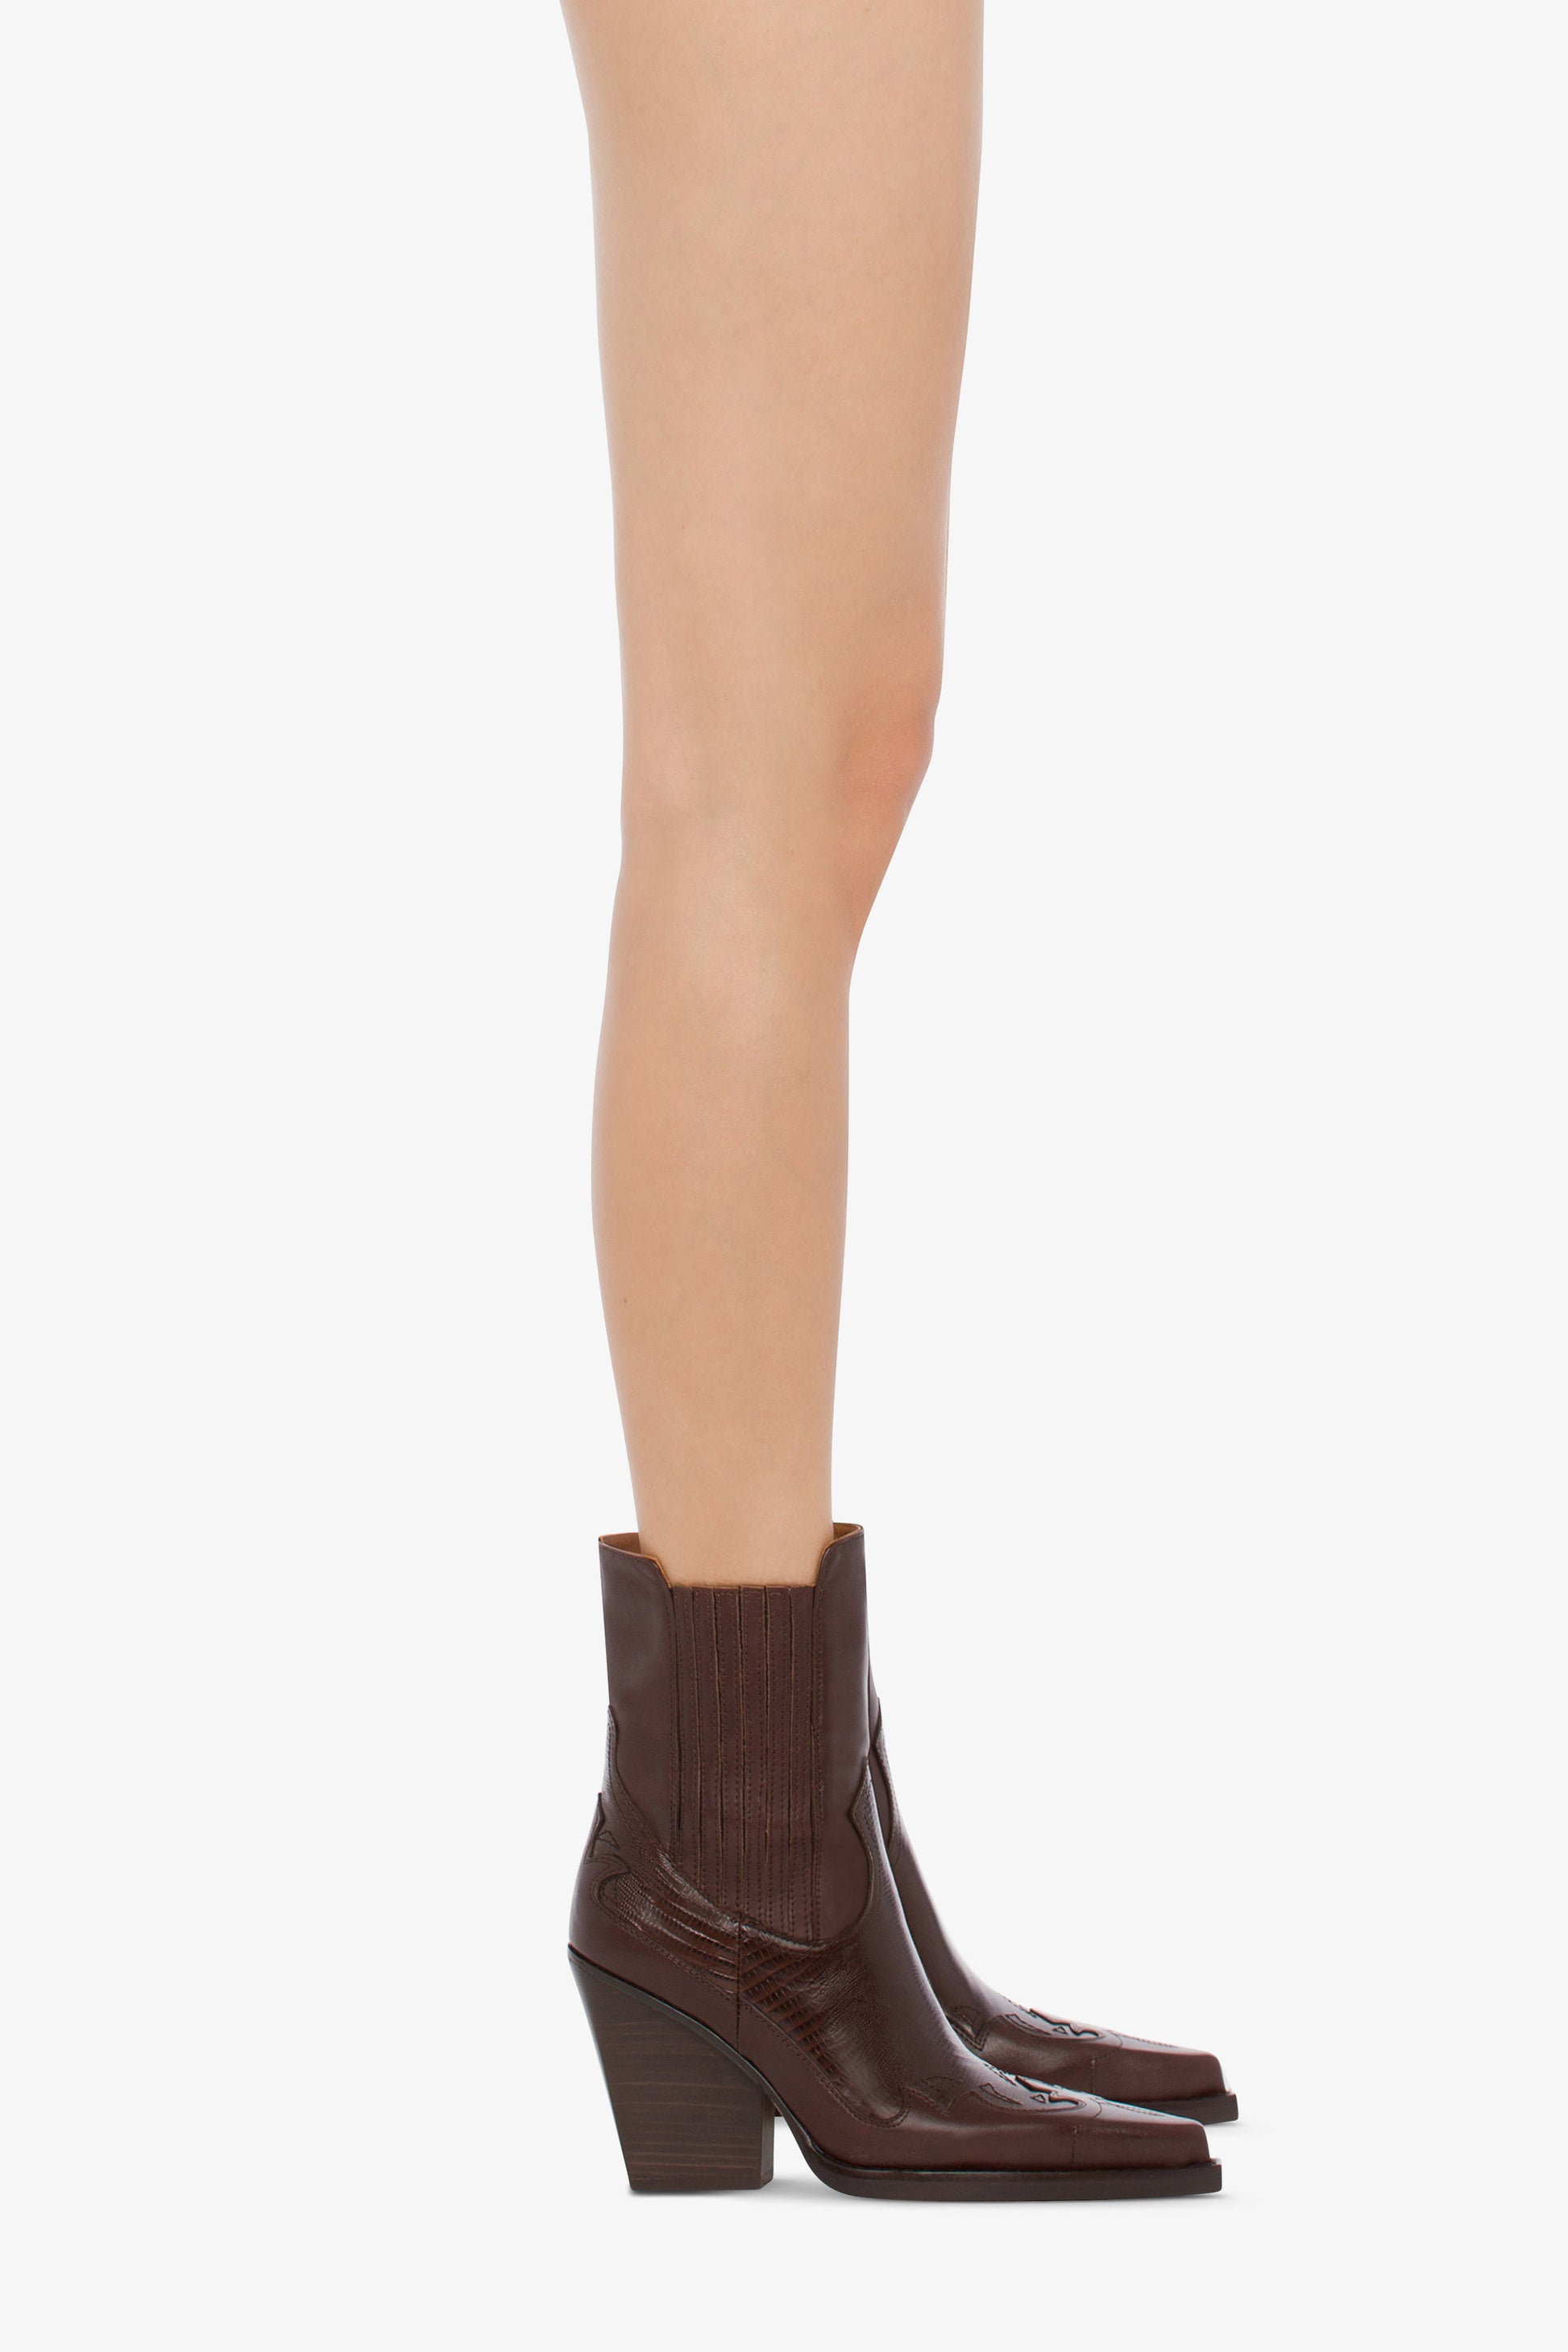 Pointed ankle boots in chocolate and mocha lizard-printed leather - Produkt getragen